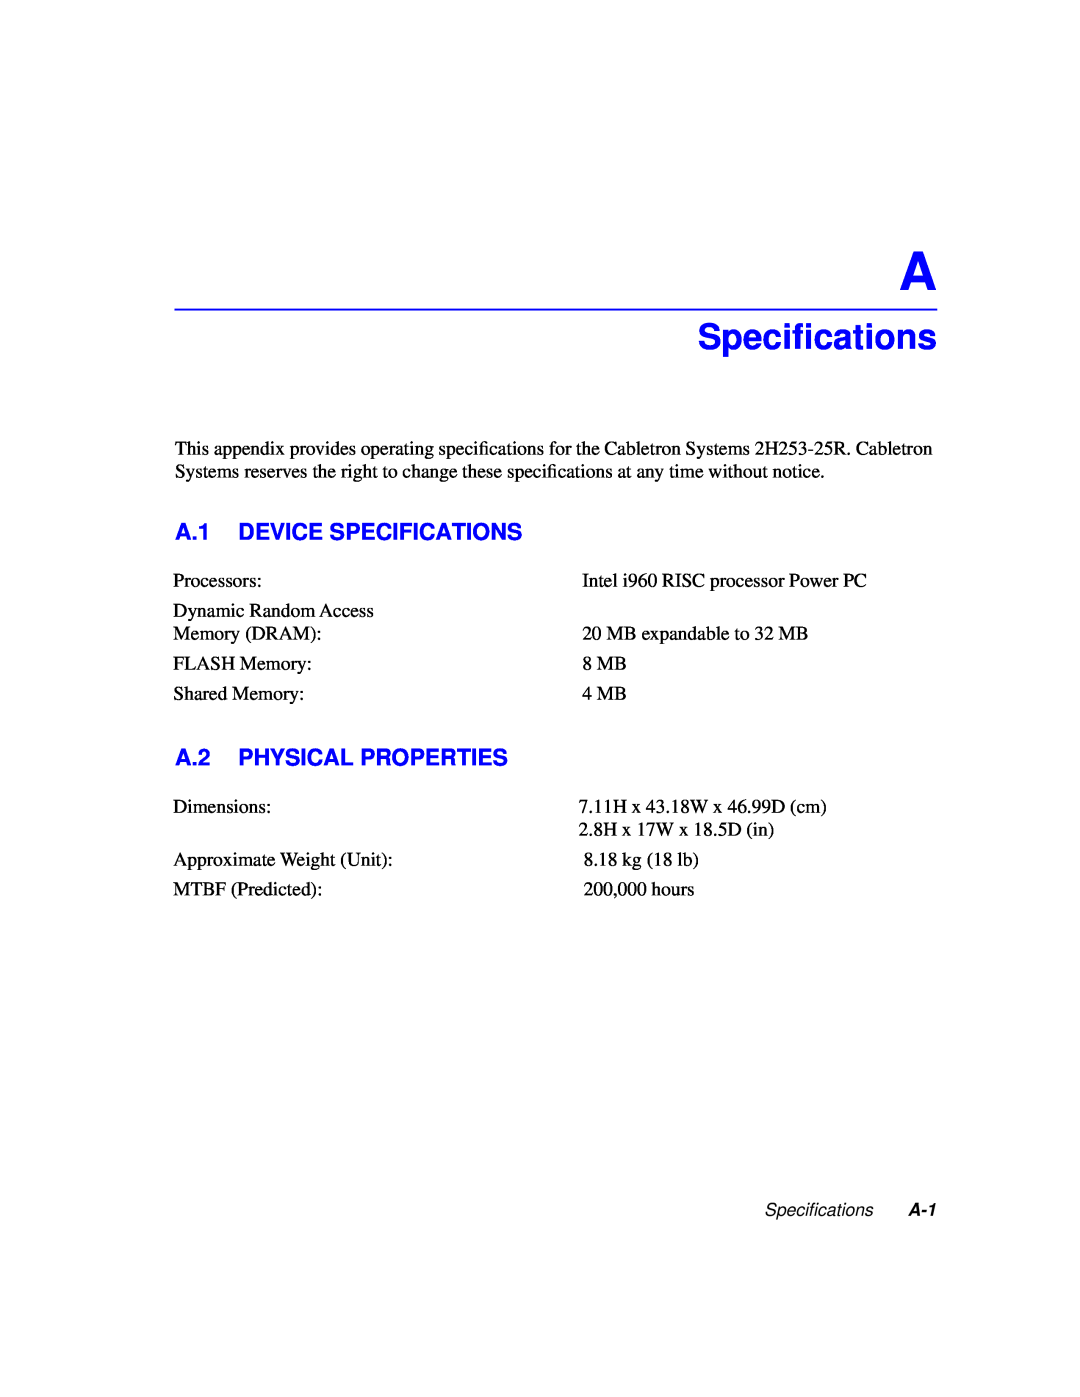 Cabletron Systems 2H253-25R manual Speciﬁcations, A.1 DEVICE SPECIFICATIONS, A.2 PHYSICAL PROPERTIES 